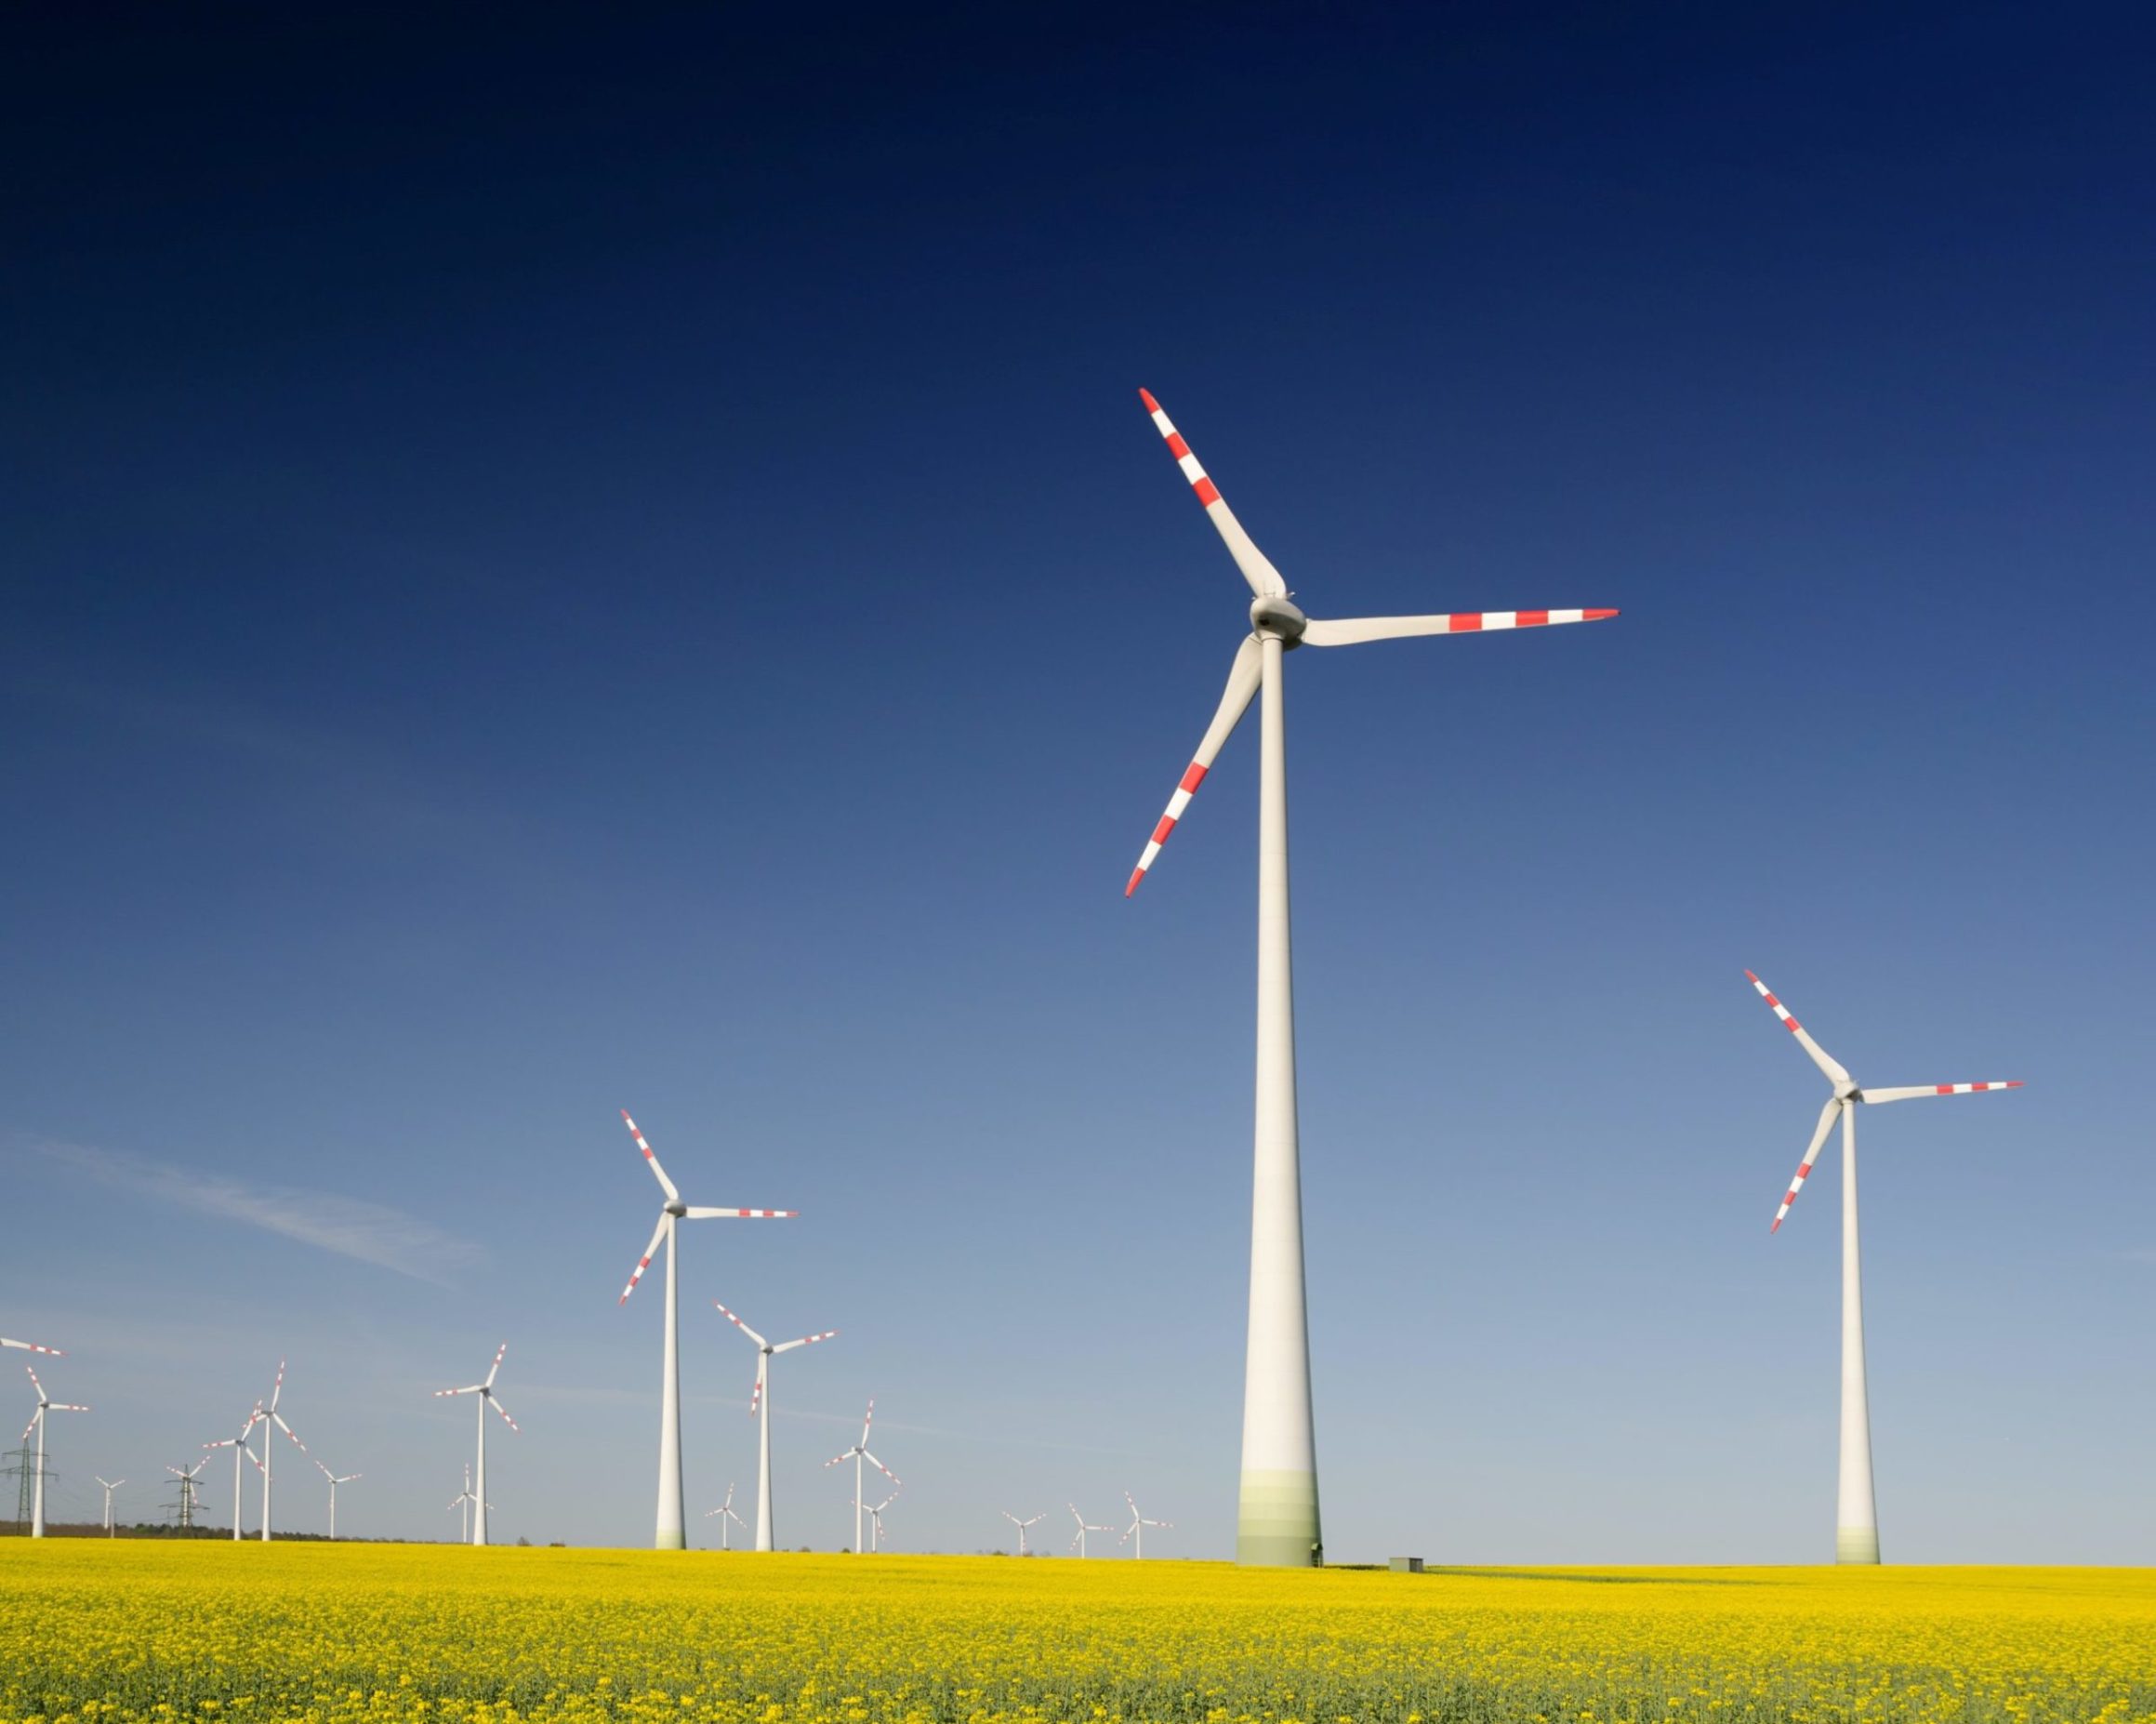 The Moster Law Firm, Wind Energy, Green Energy, Wind, Energy, Wind Turbine, Windmill, Turbine, Electricity,